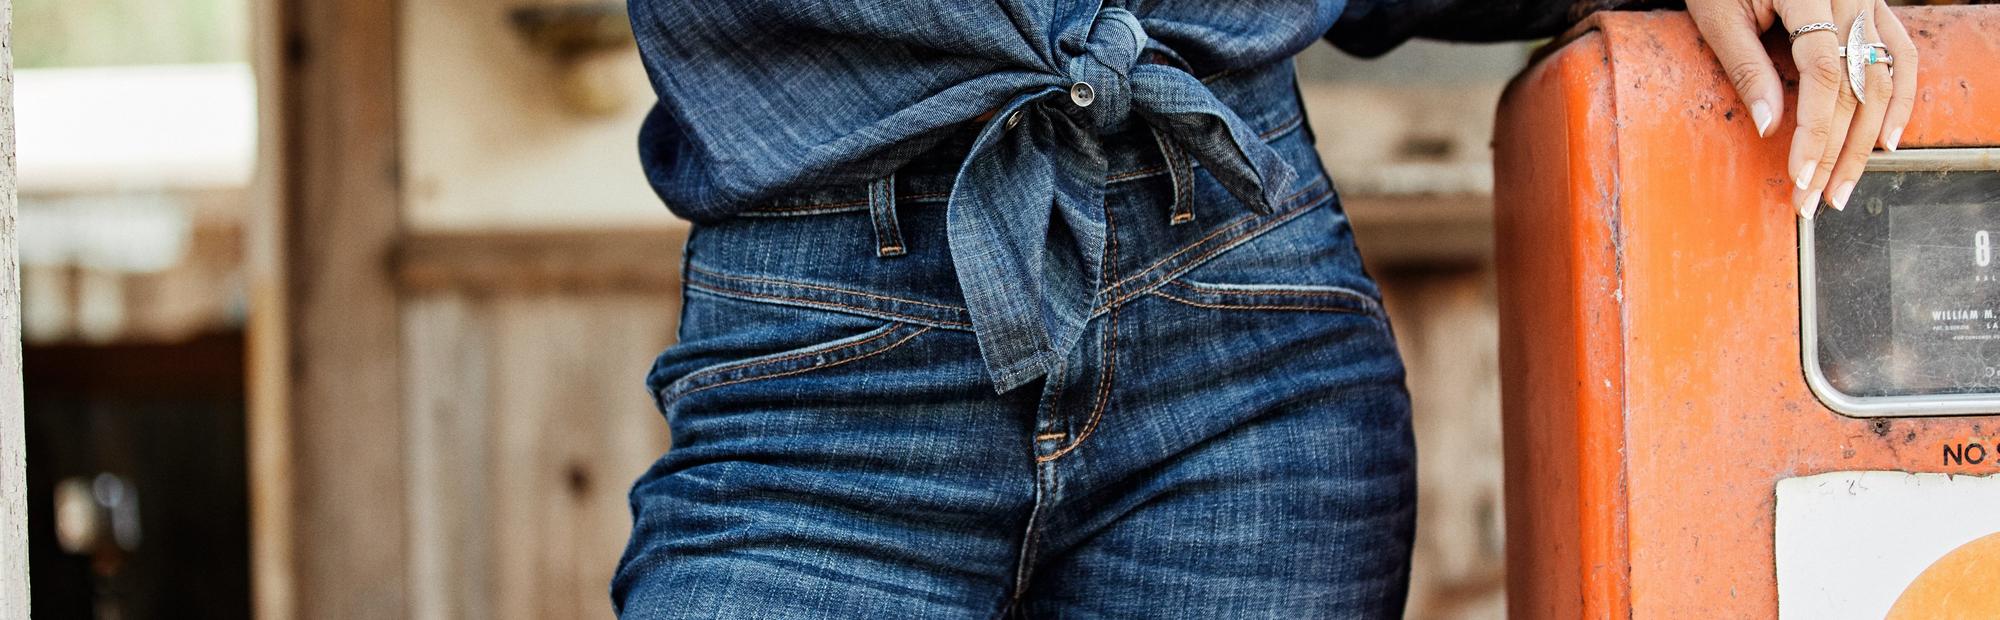 How to Sew a Hole in Your Jeans